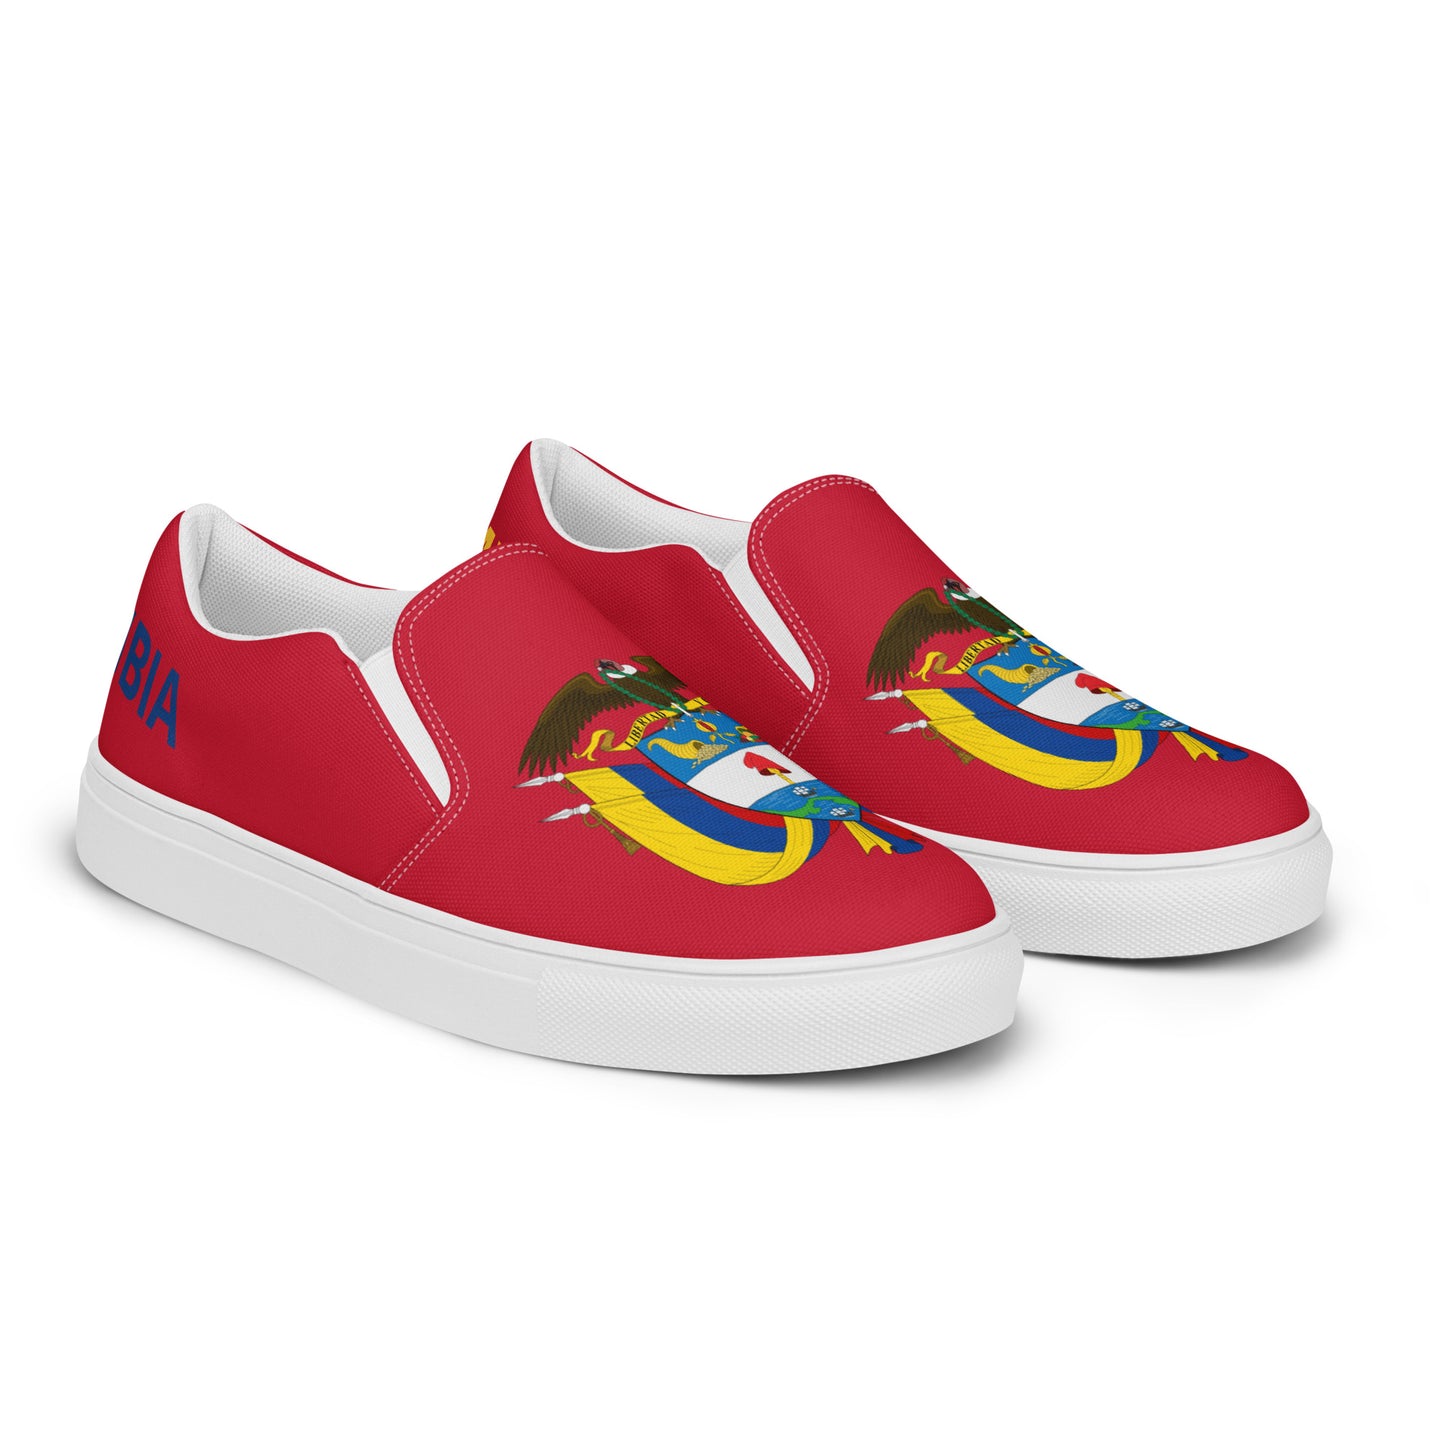 Colombia - Women - Red - Slip-on shoes